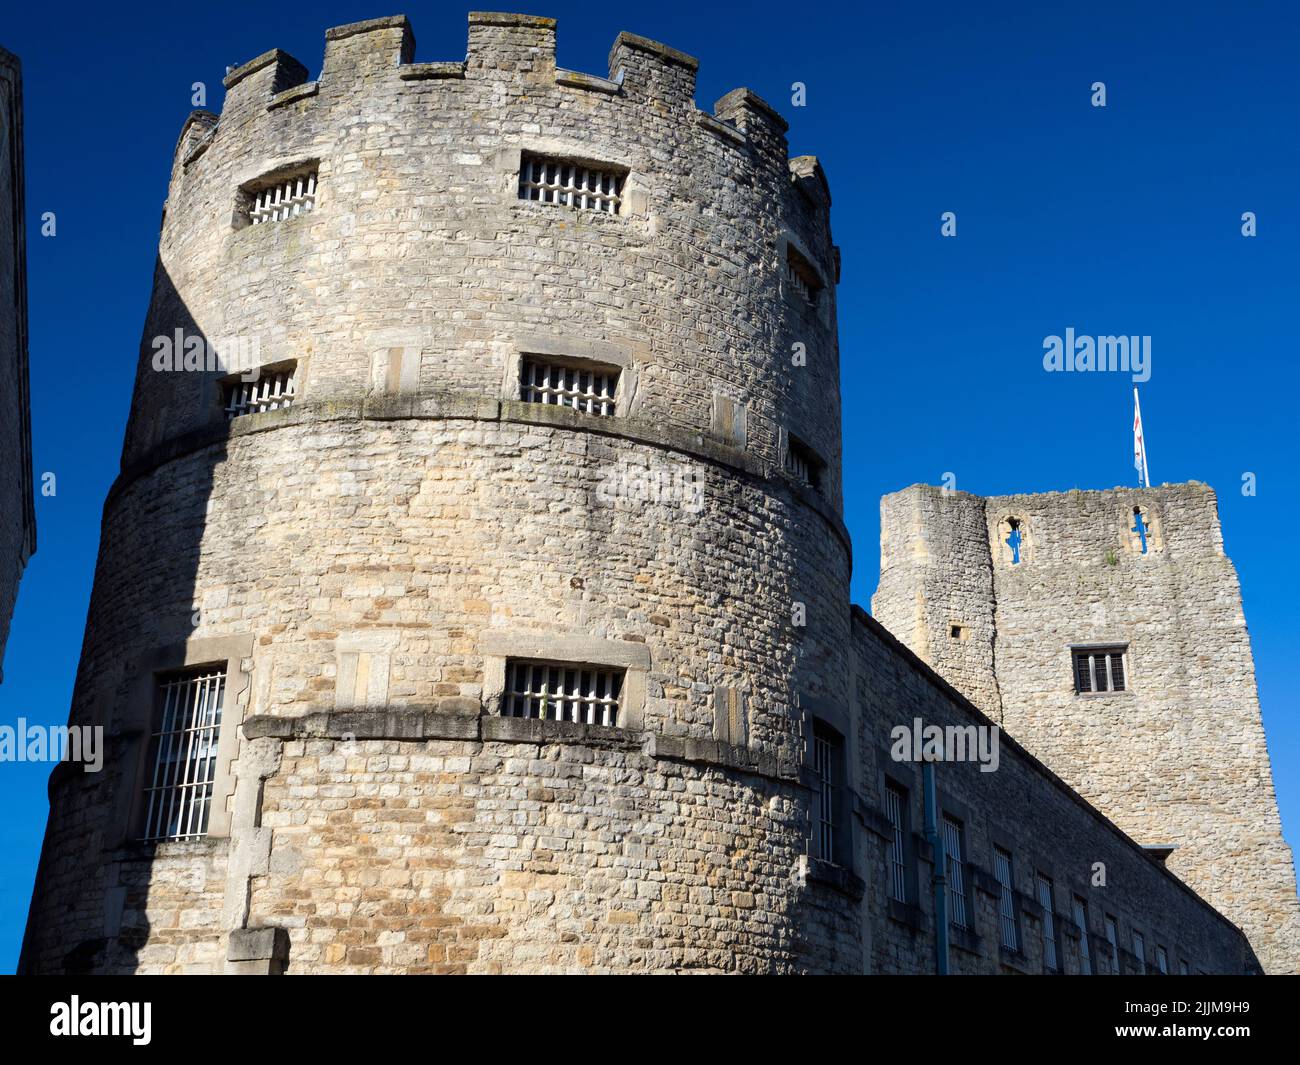 Oxford Castle is a mostly ruined medieval Norman castle in central Oxford It has a long and eventful history. Most of its original motte and bailey st Stock Photo